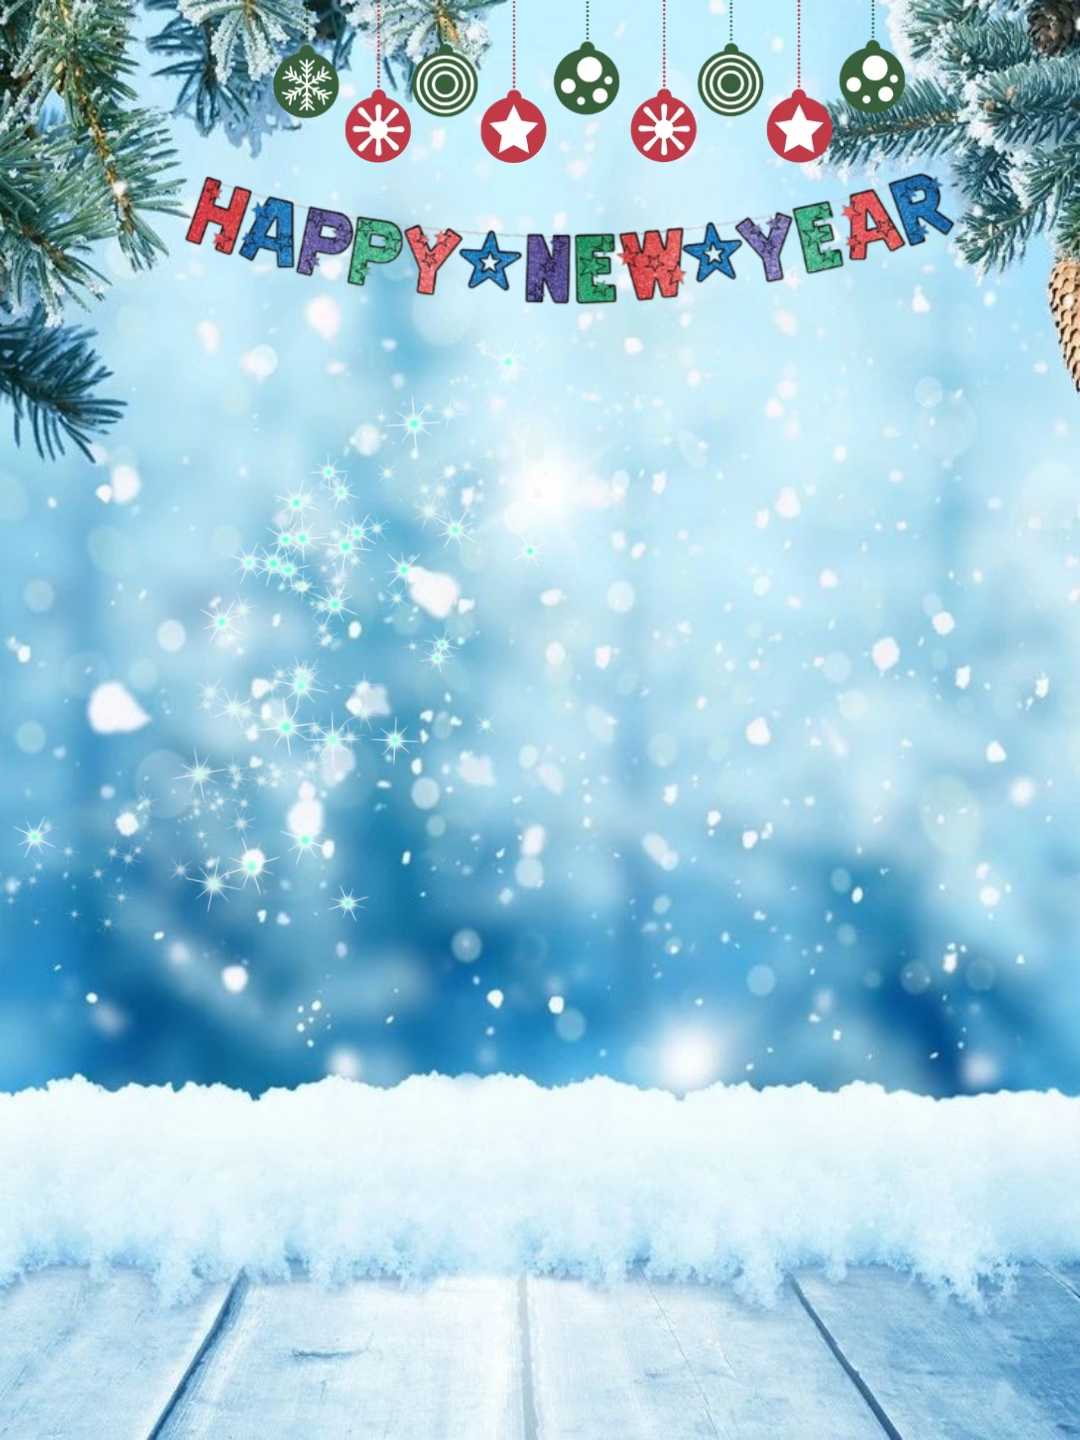 Happy New Year Editing Background